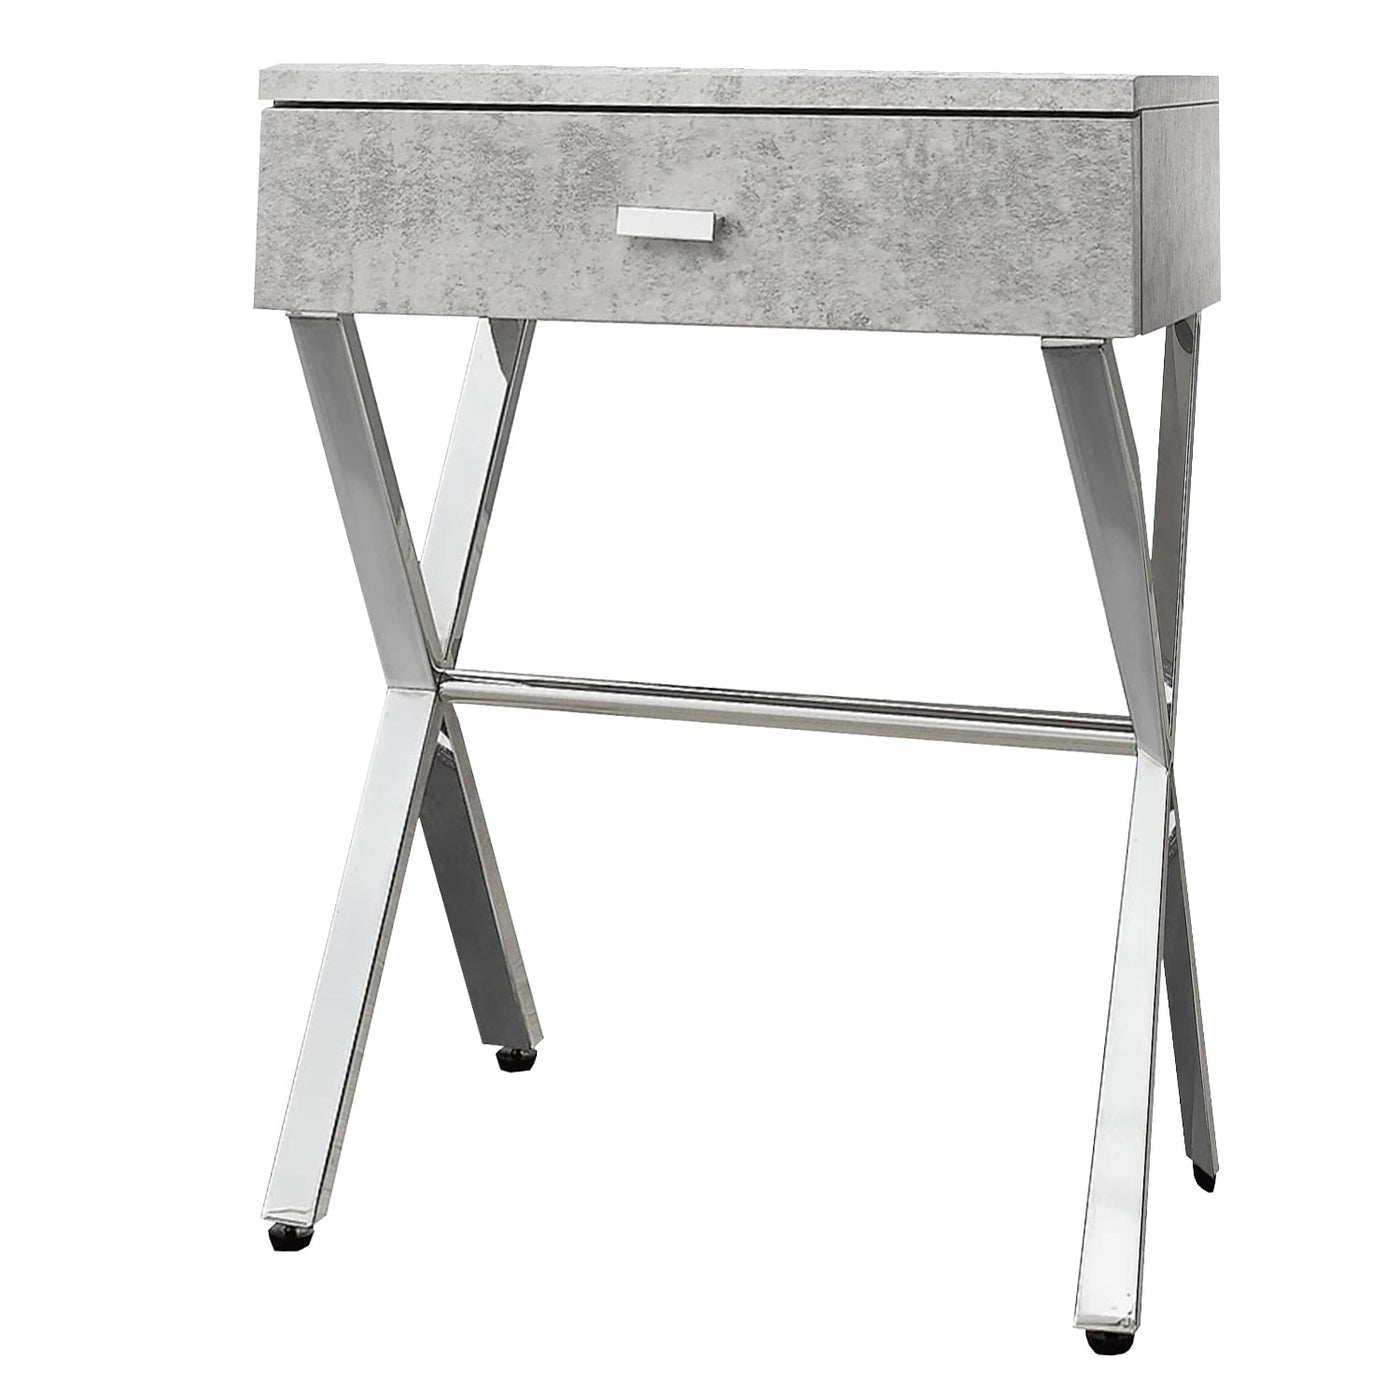 22’ Silver And White End Table With Drawer - Grey,Chrome - End-Side Tables